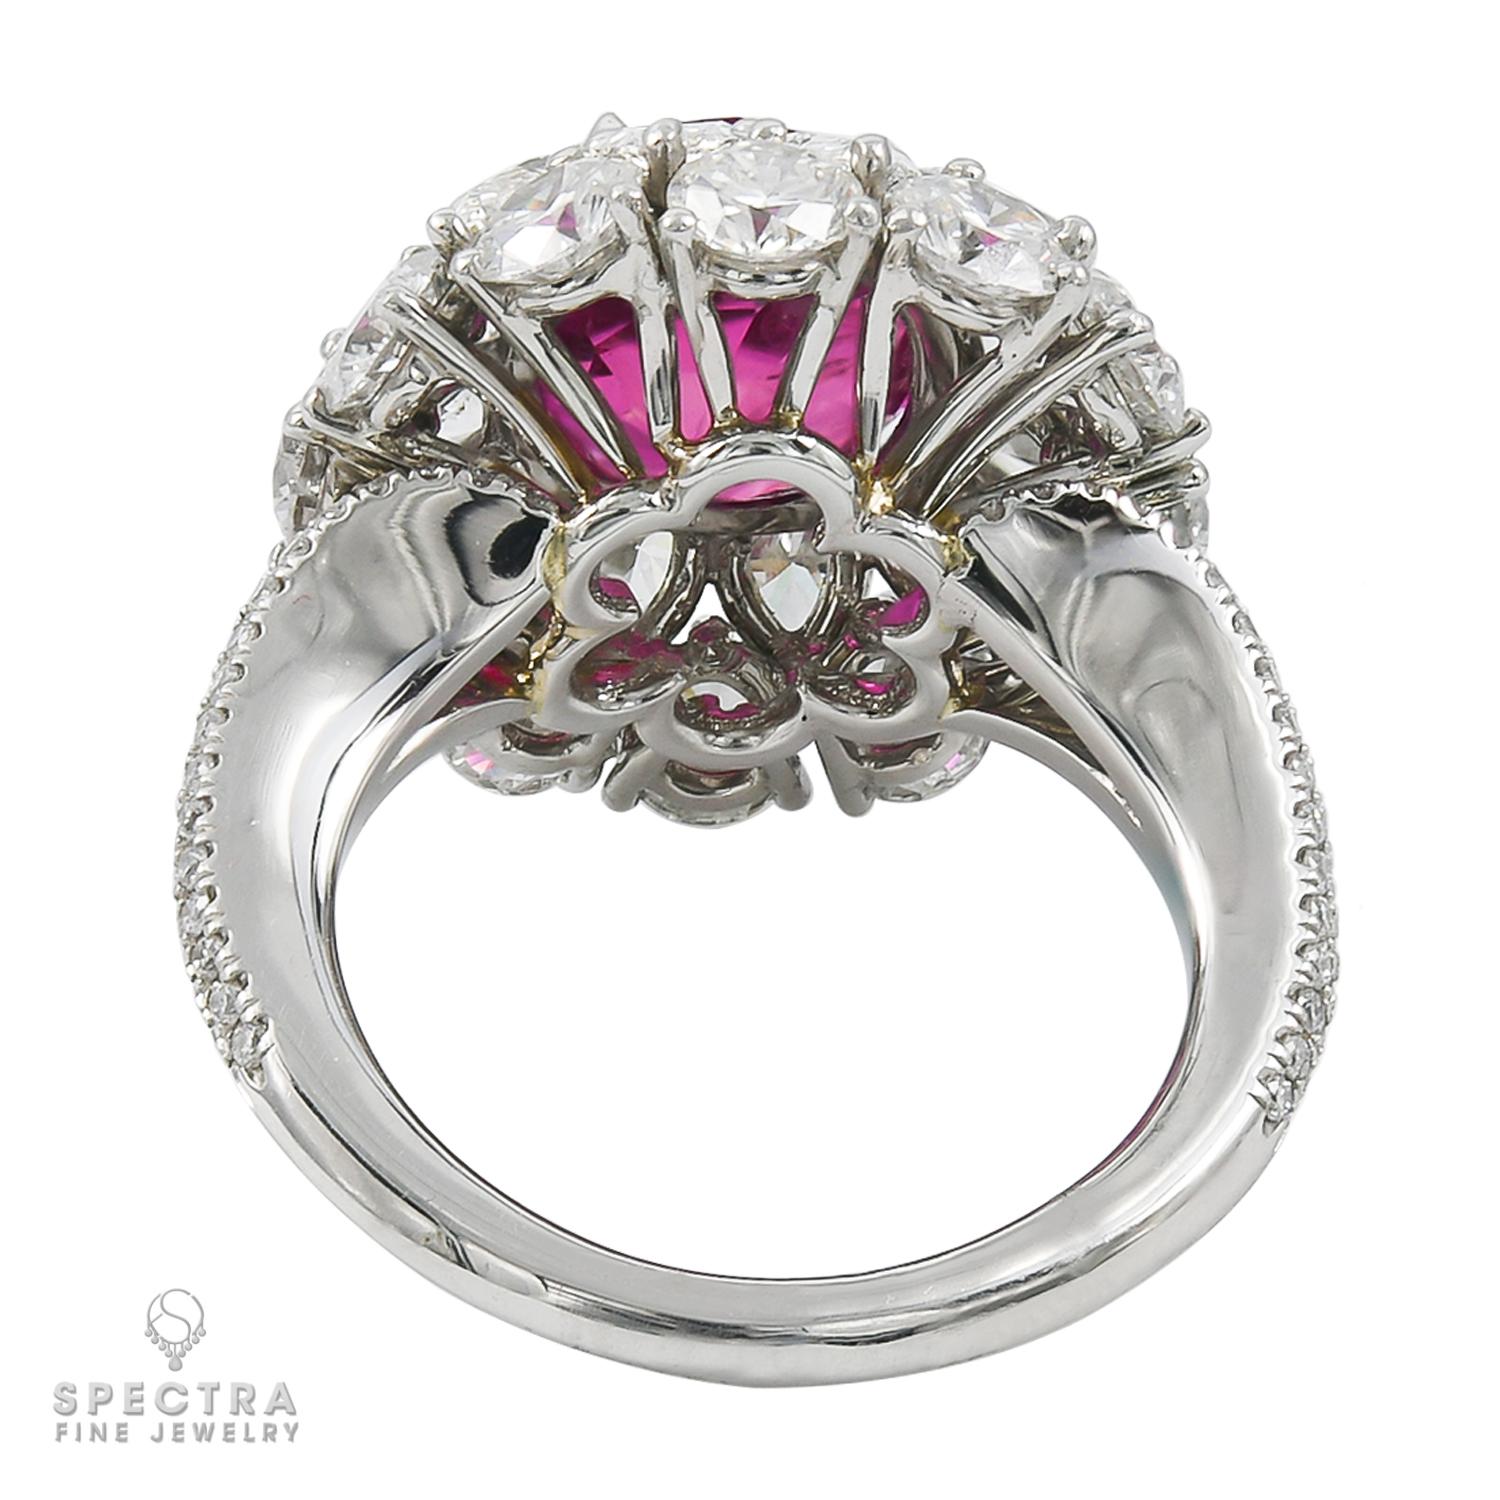 Spectra Fine Jewelry 4.99 Carat Ruby Diamond Cocktail Ring In New Condition For Sale In New York, NY